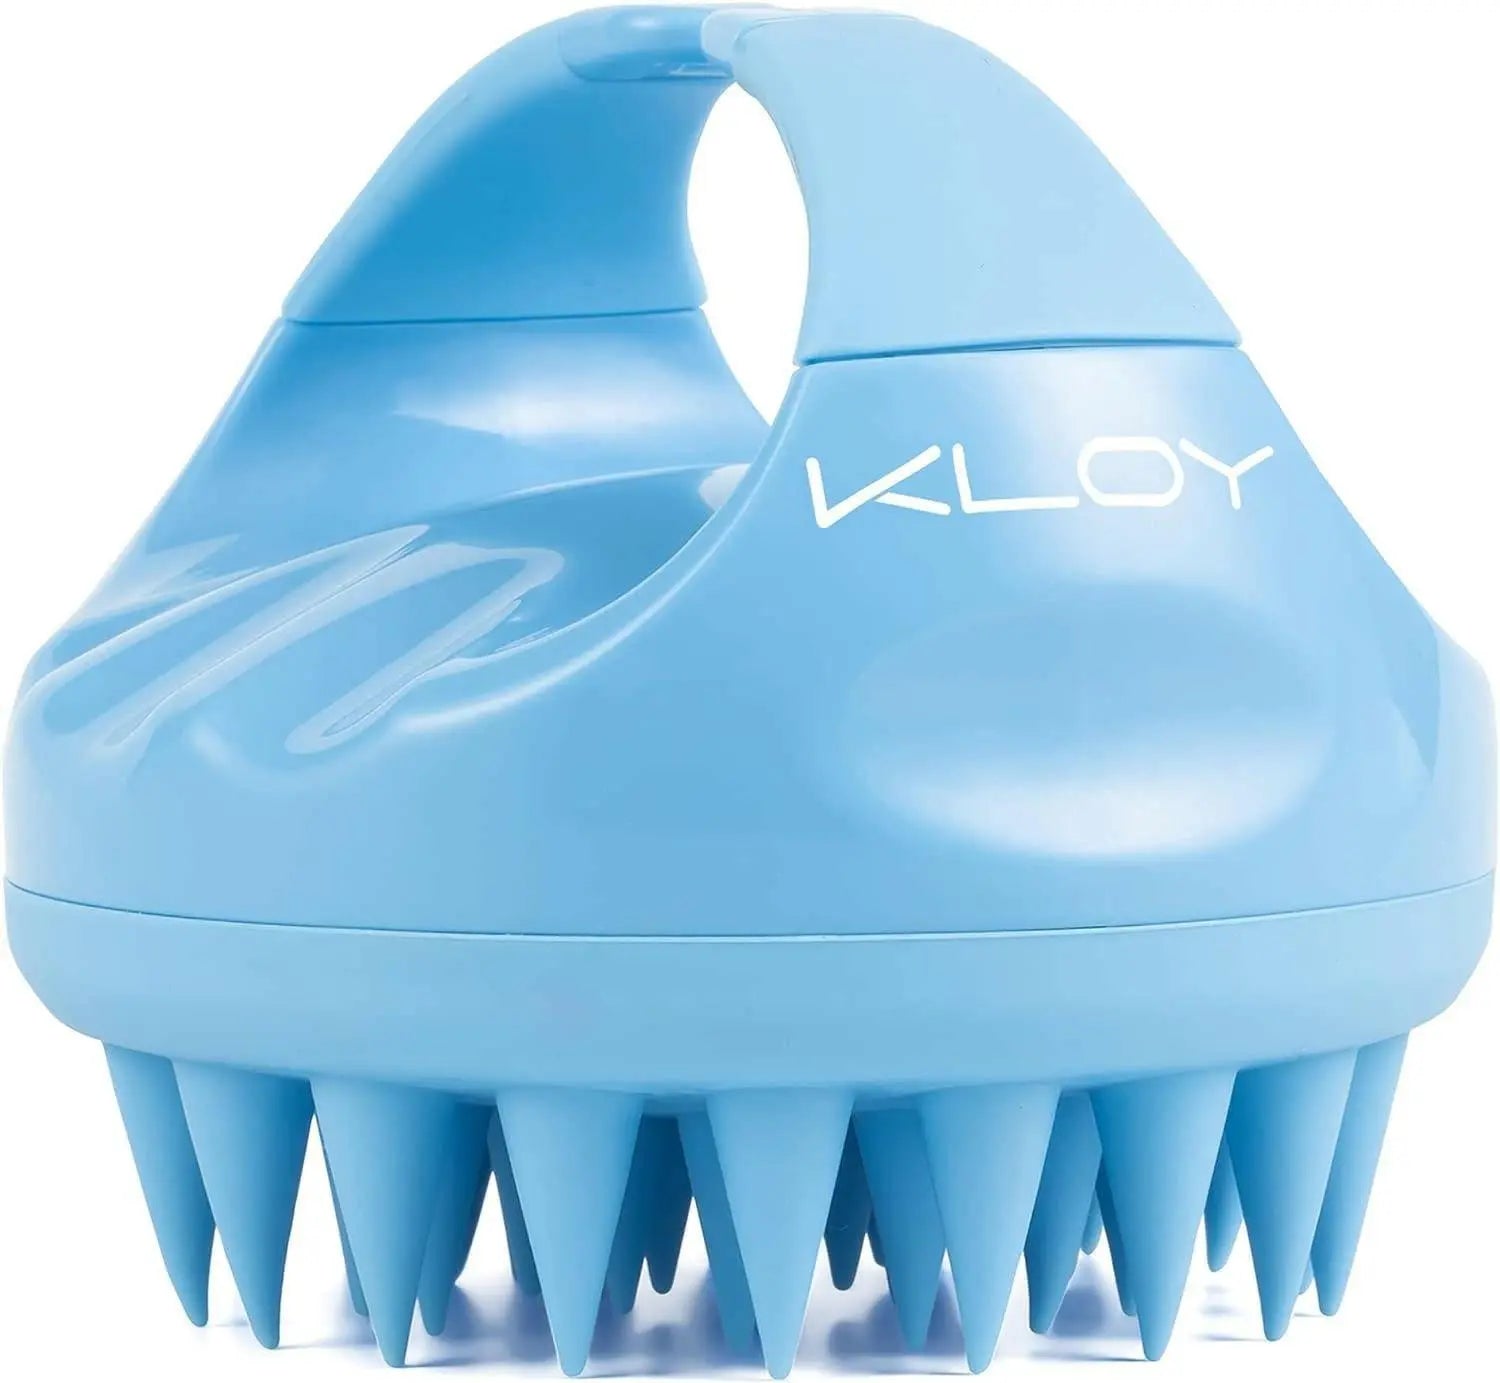 Kloy Hair Scalp Massager Shampoo Brush With Soft Silicone Bristles- Black